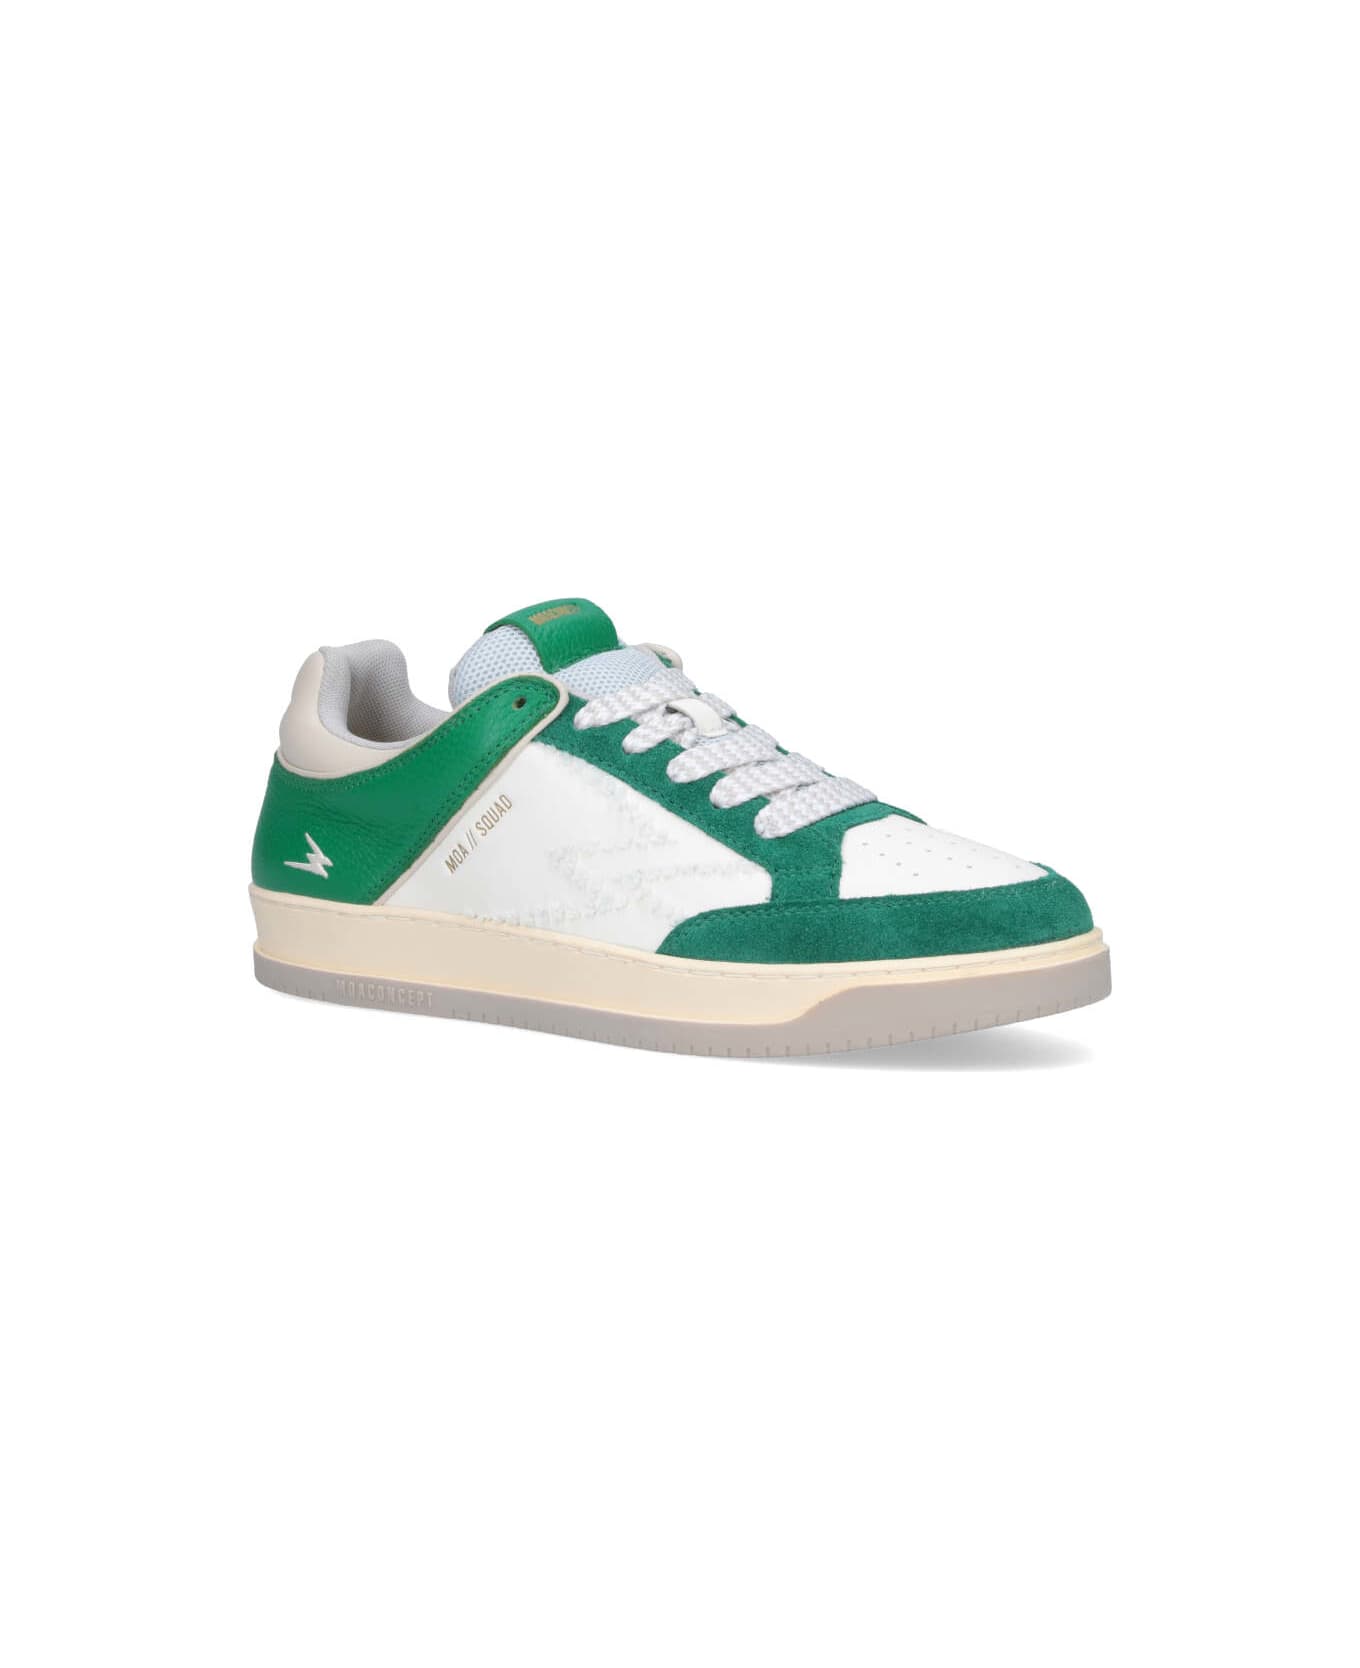 M.O.A. master of arts 'squad' Sneakers - Green スニーカー